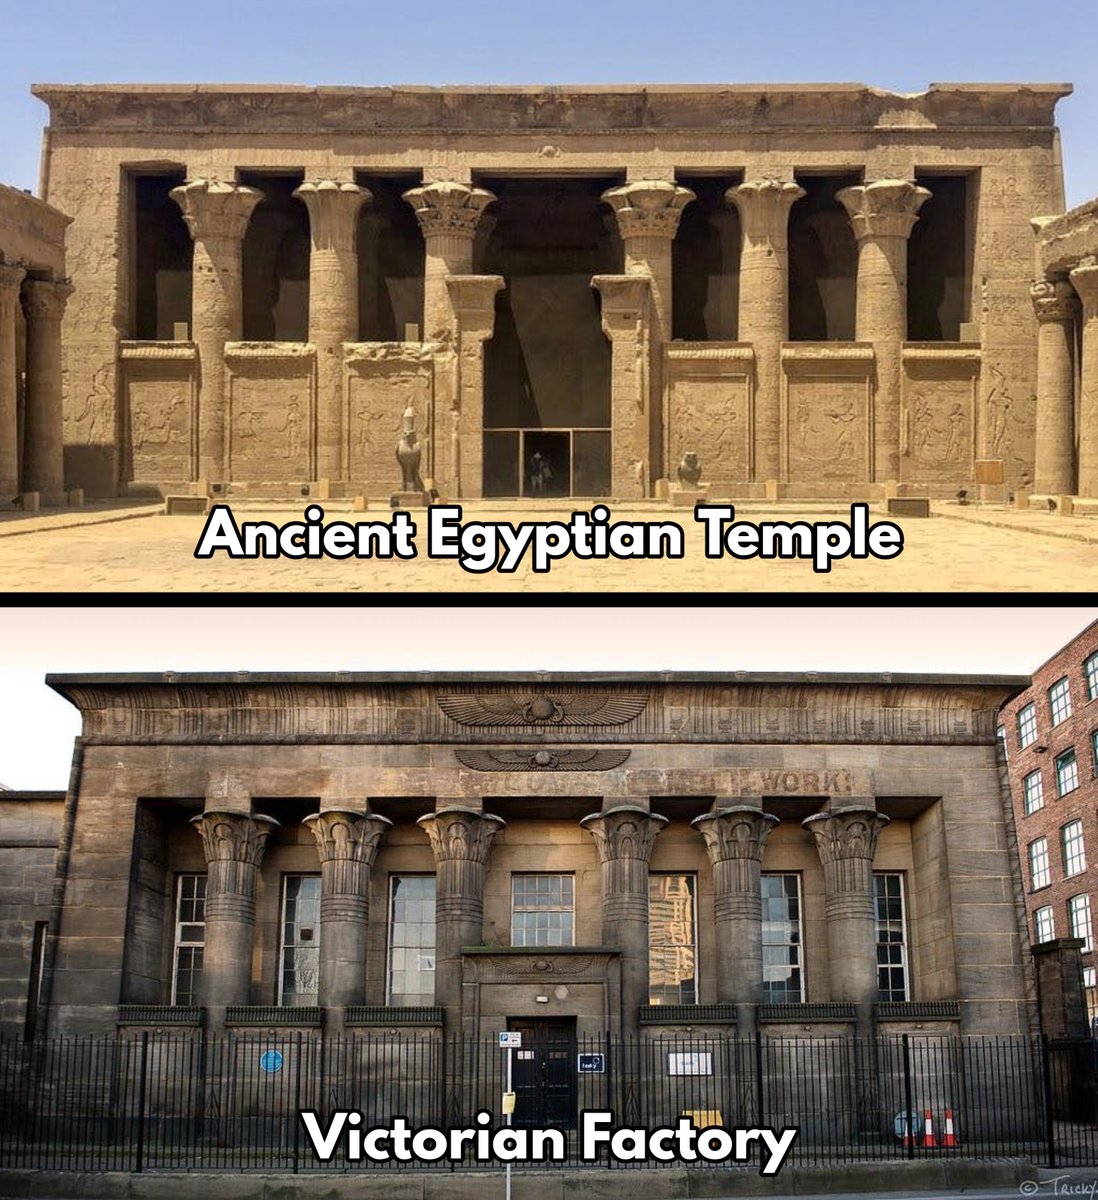 This building is not a palace, court, library, or theatre — it's a 19th century factory in northern England. And its design was directly based on the Ancient Egyptian Temple of Horus in Edfu. Why are Victorian factories more interesting than the most expensive modern buildings?…